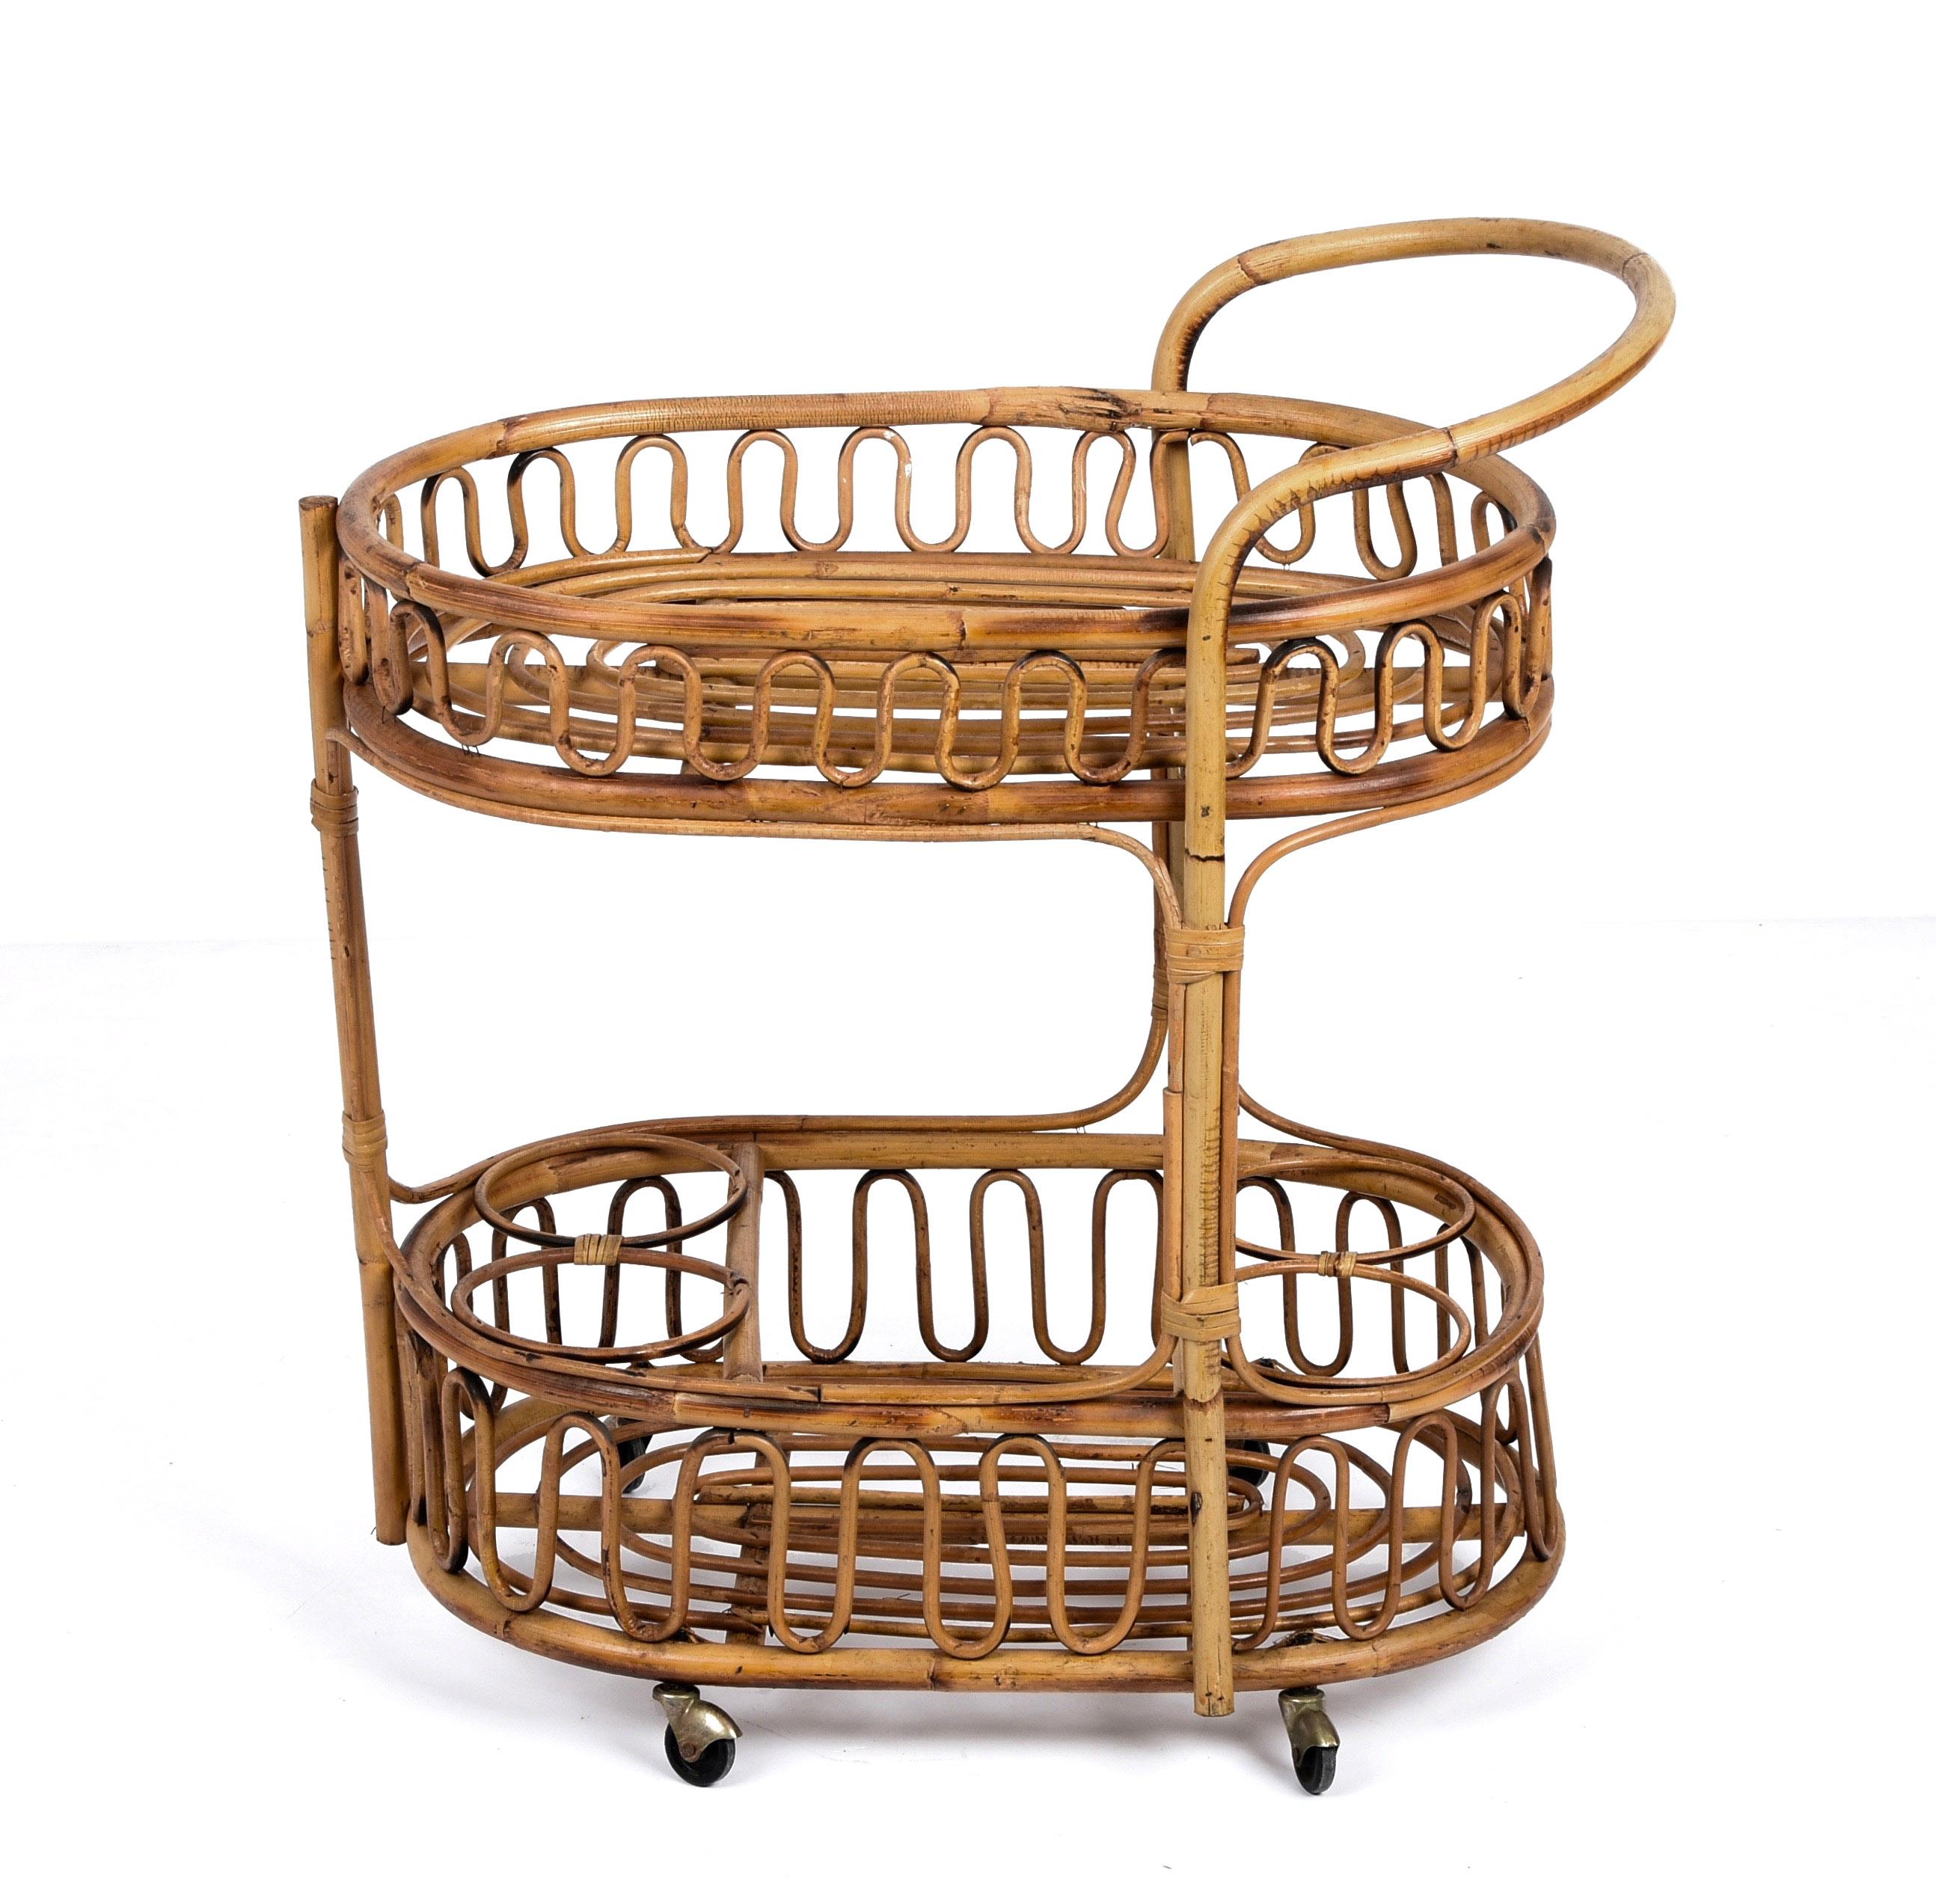 Fabulous midcentury two-tiers bar trolley in fantastic vintage conditions. This wonderful item was produced in Italy during the 1960s.

This fantastic piece has a bamboo structure and rattan floor bases, a lower-tier that is ideal for bottles with